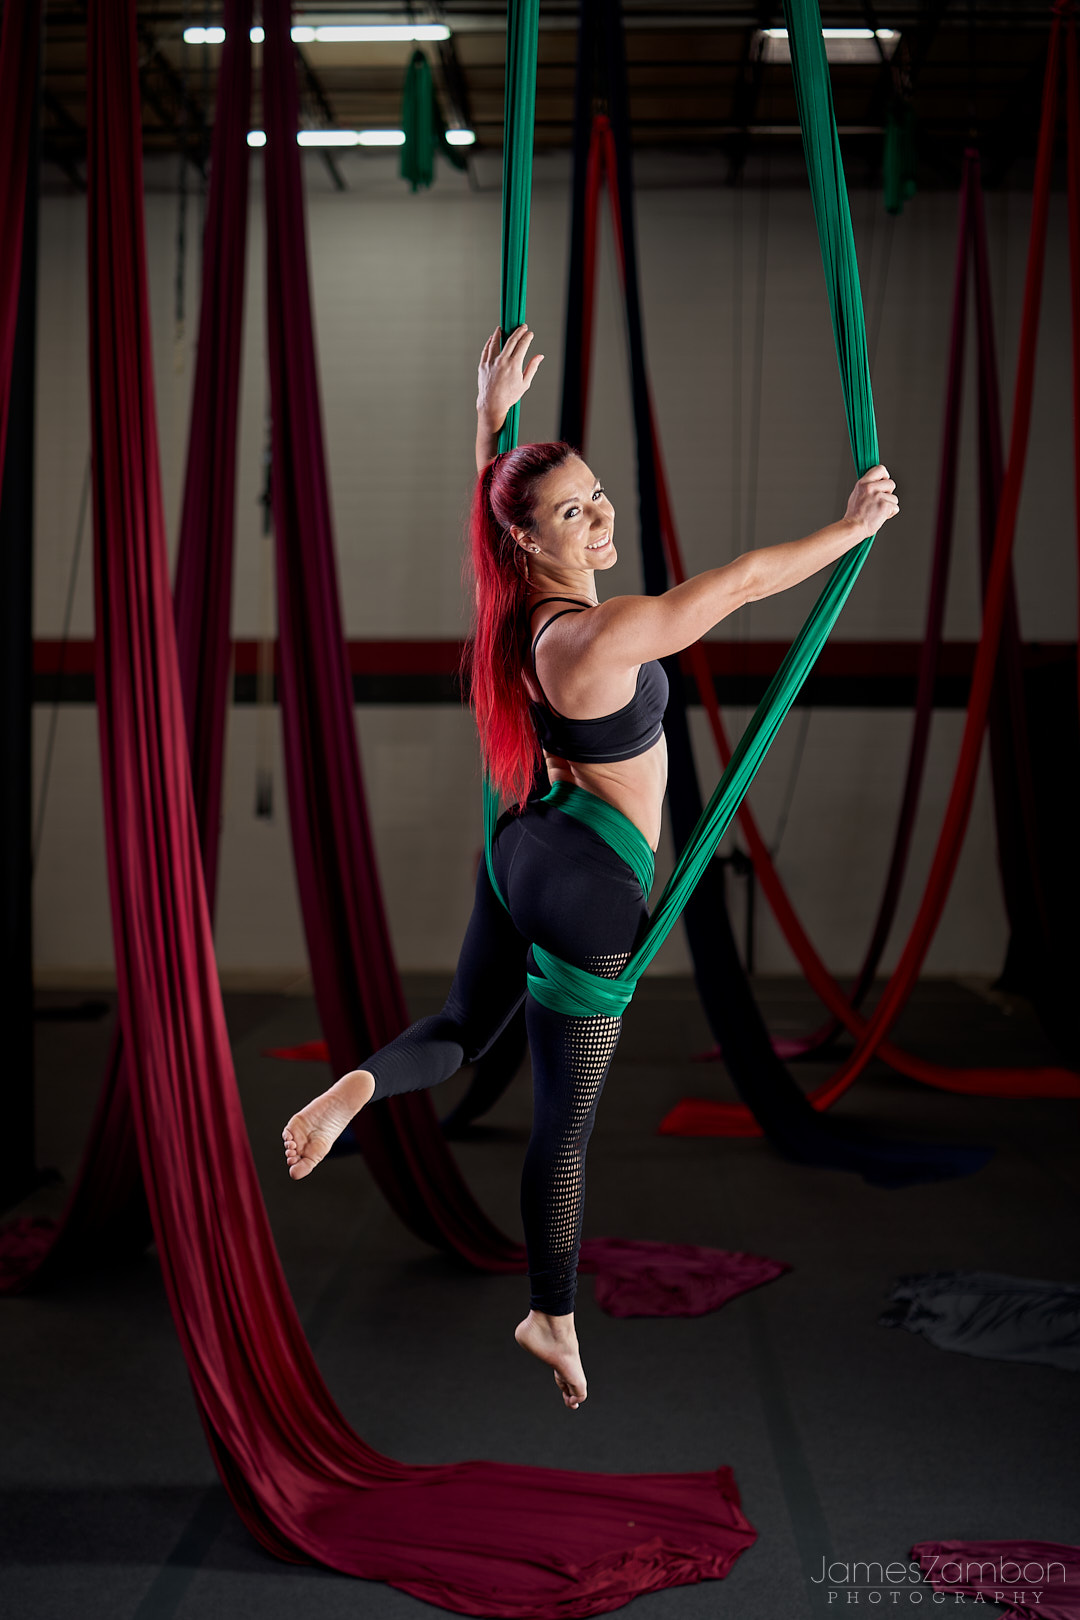 Take your yoga practice to new heights with Trapeze Yoga at Flow Yoga  Studio! 🌟 This innovative practice combines traditional yoga poses…